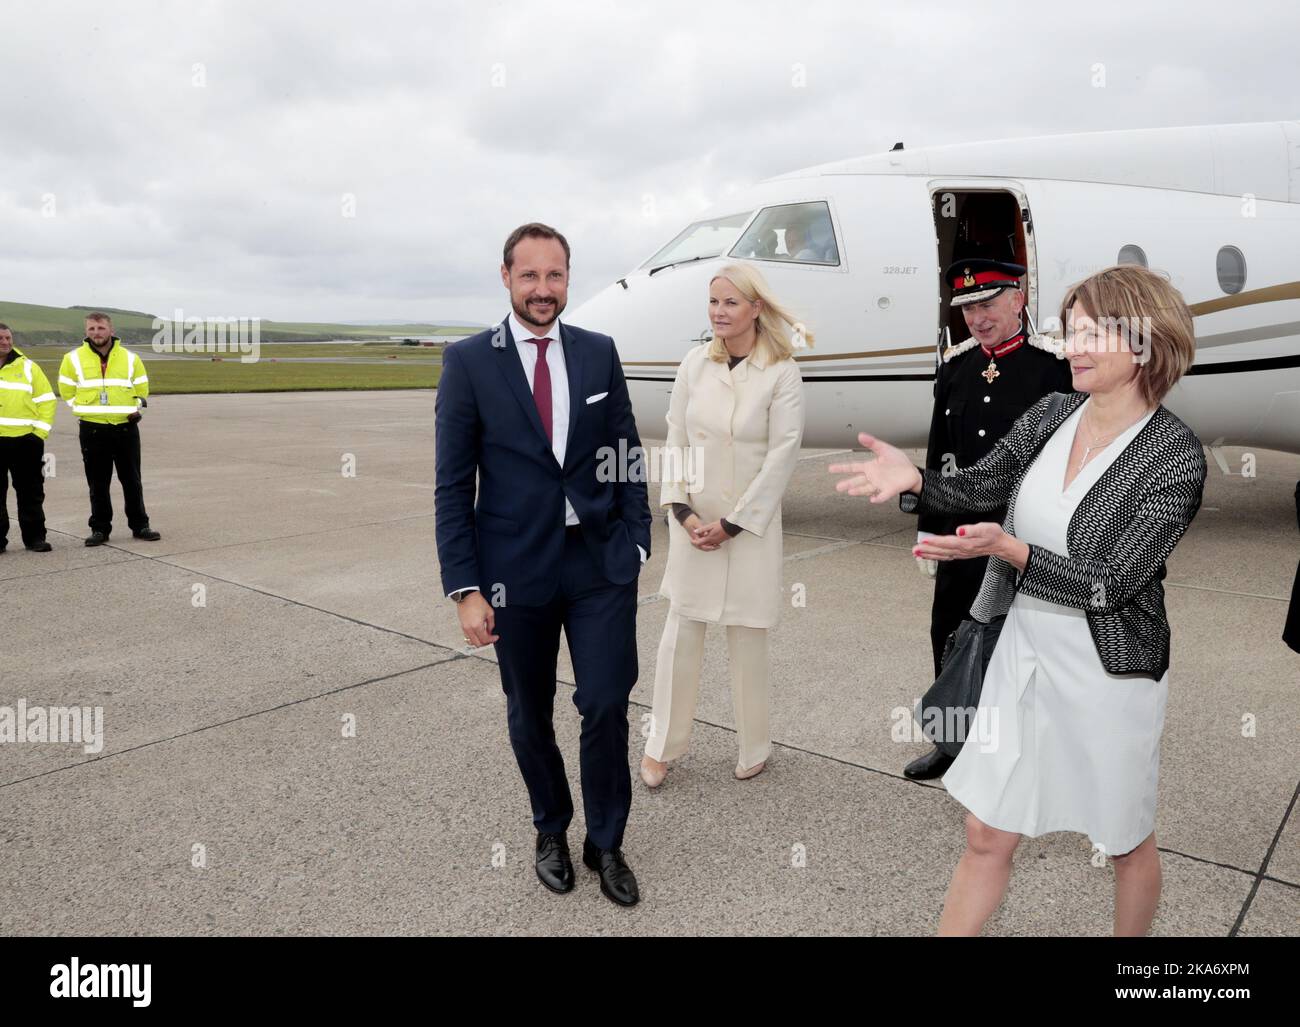 KIRKWALL, Great Britain 20170616. Crown Princess Mette-Marit and Crown Prince Haakon arrive at Kirkwall Airport on Orkney Islands on the occasion of the official visit in connection with the St. Magnus festival. Right: Ambassador Mona Juul. Photo: Lise Aaserud / NTB scanpix Stock Photo